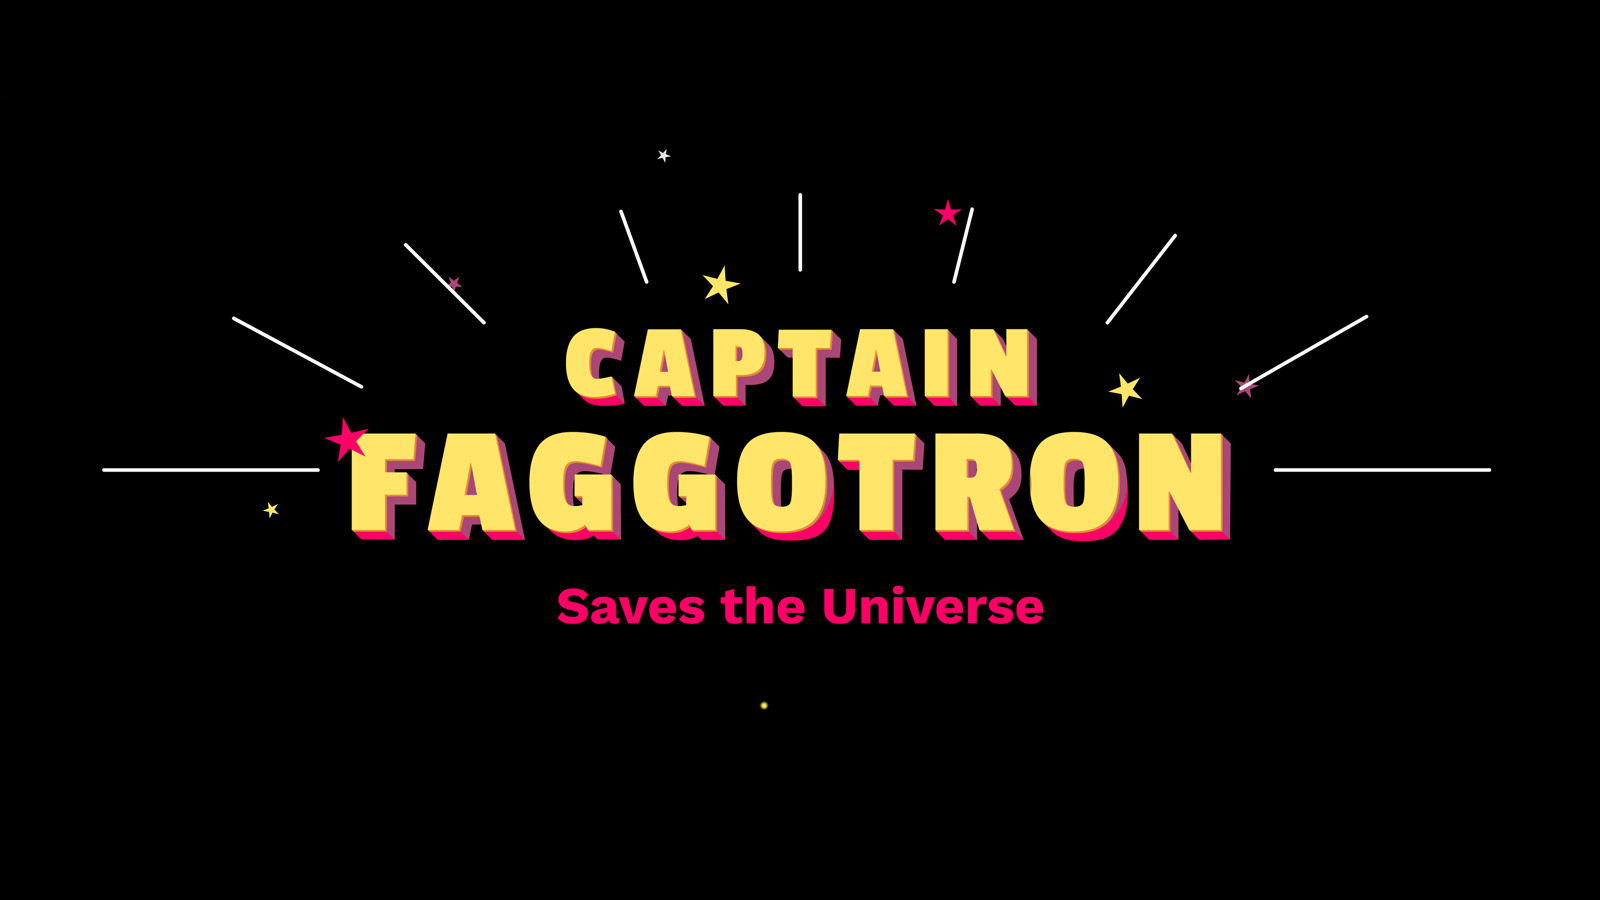 CAPTAIN FAGGOTRON SAVES THE UNIVERSE – example image of the animation | MARIA LISSEL Animation + Motion Design | maria-lissel.de